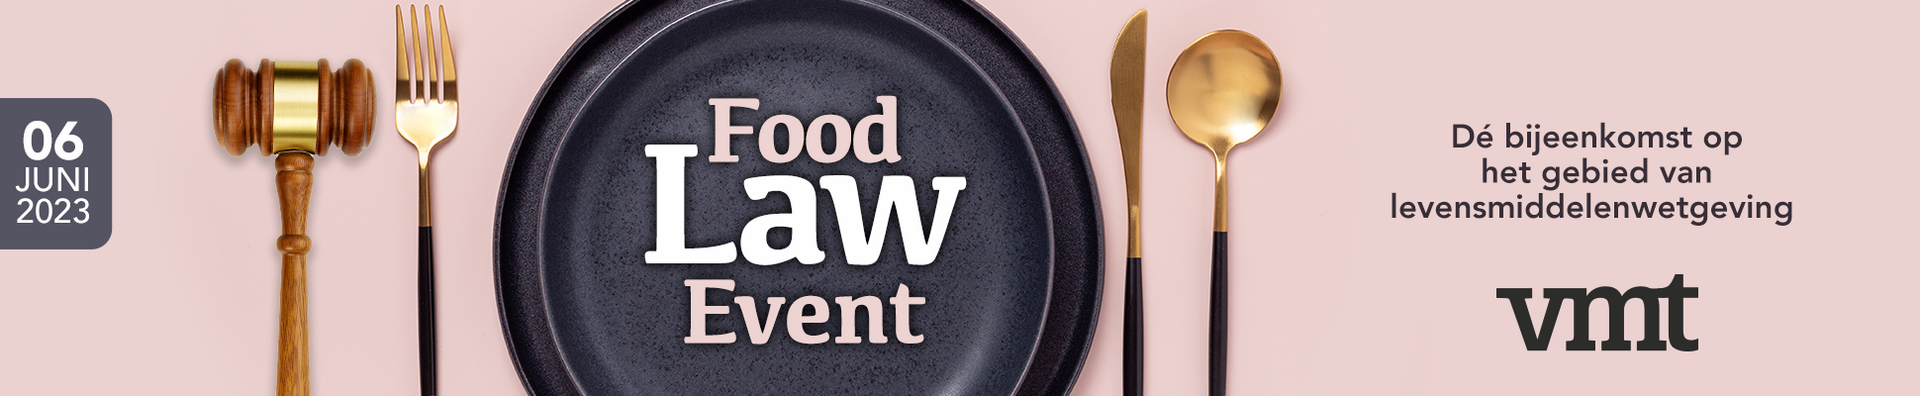 Food Law Event 2023